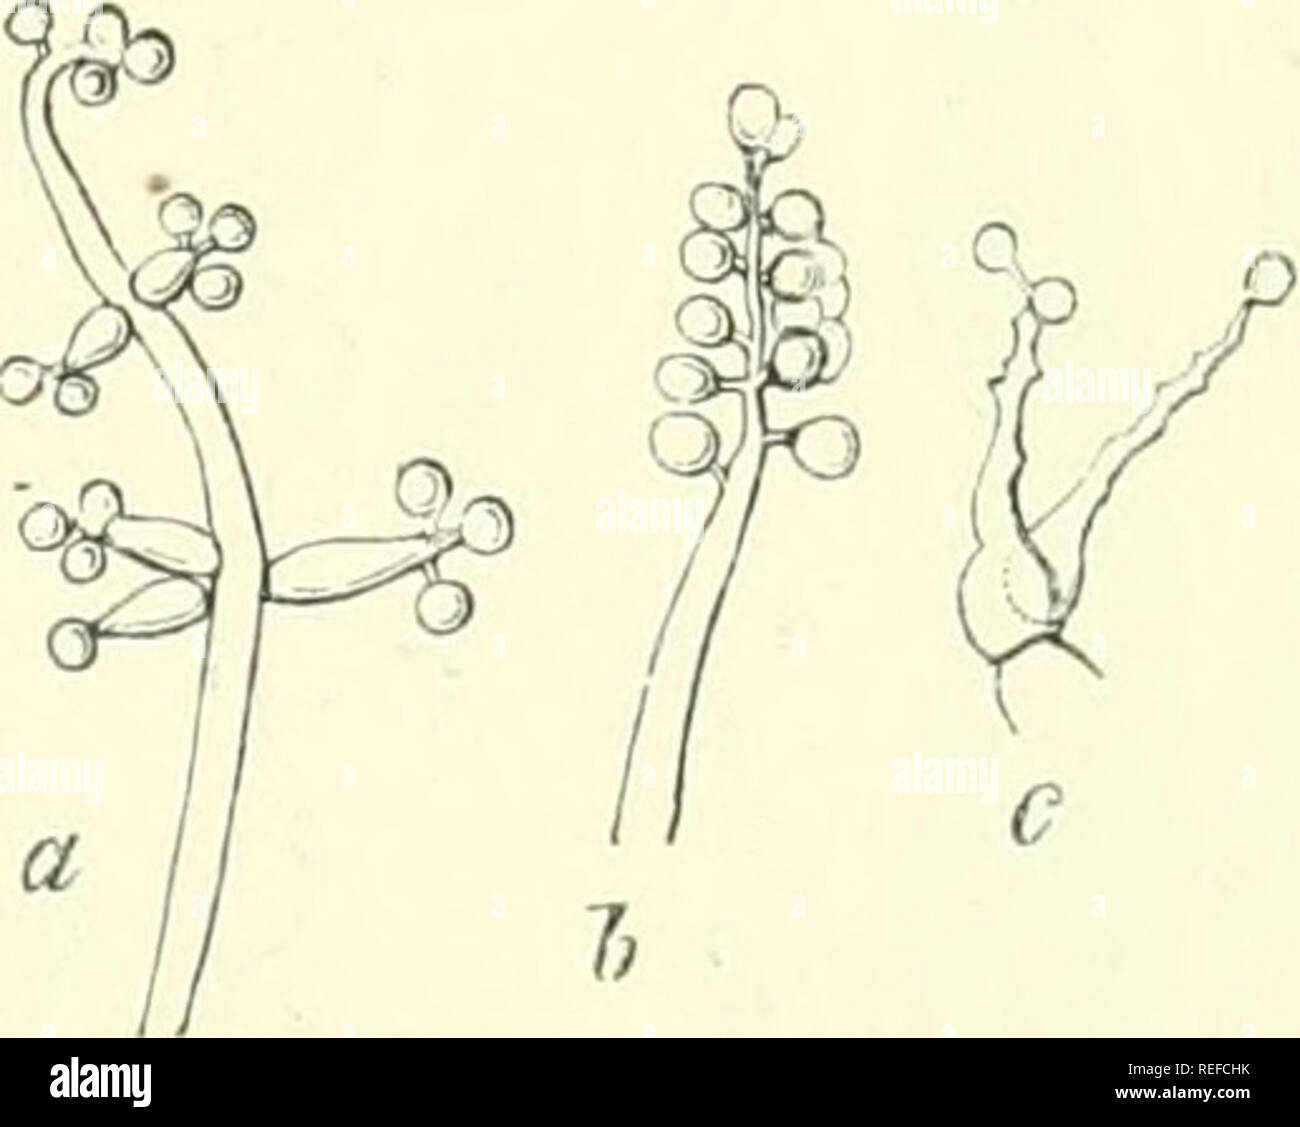 . Comparative morphology and biology of the fungi, mycetozoa and bacteria. Fungi -- Morphology; Bacteria -- Morphology. FIG. 31. Dactylium macrosporitm, Fr. Extremities of spori- ferous hyphae. a in a dry state with a head of spores above, b in water with the primordia of the youngest spores j at the extremities of the branches, the small unevennesses beneath being the points of attachment of the older spores which have become detached in the water. Magn. 300 times.. FlG. 32. Botrytis Bassii, Bals. a end of a young sporiferous hypha ; short lateral branchlets have successively abjointed each 1 Stock Photo